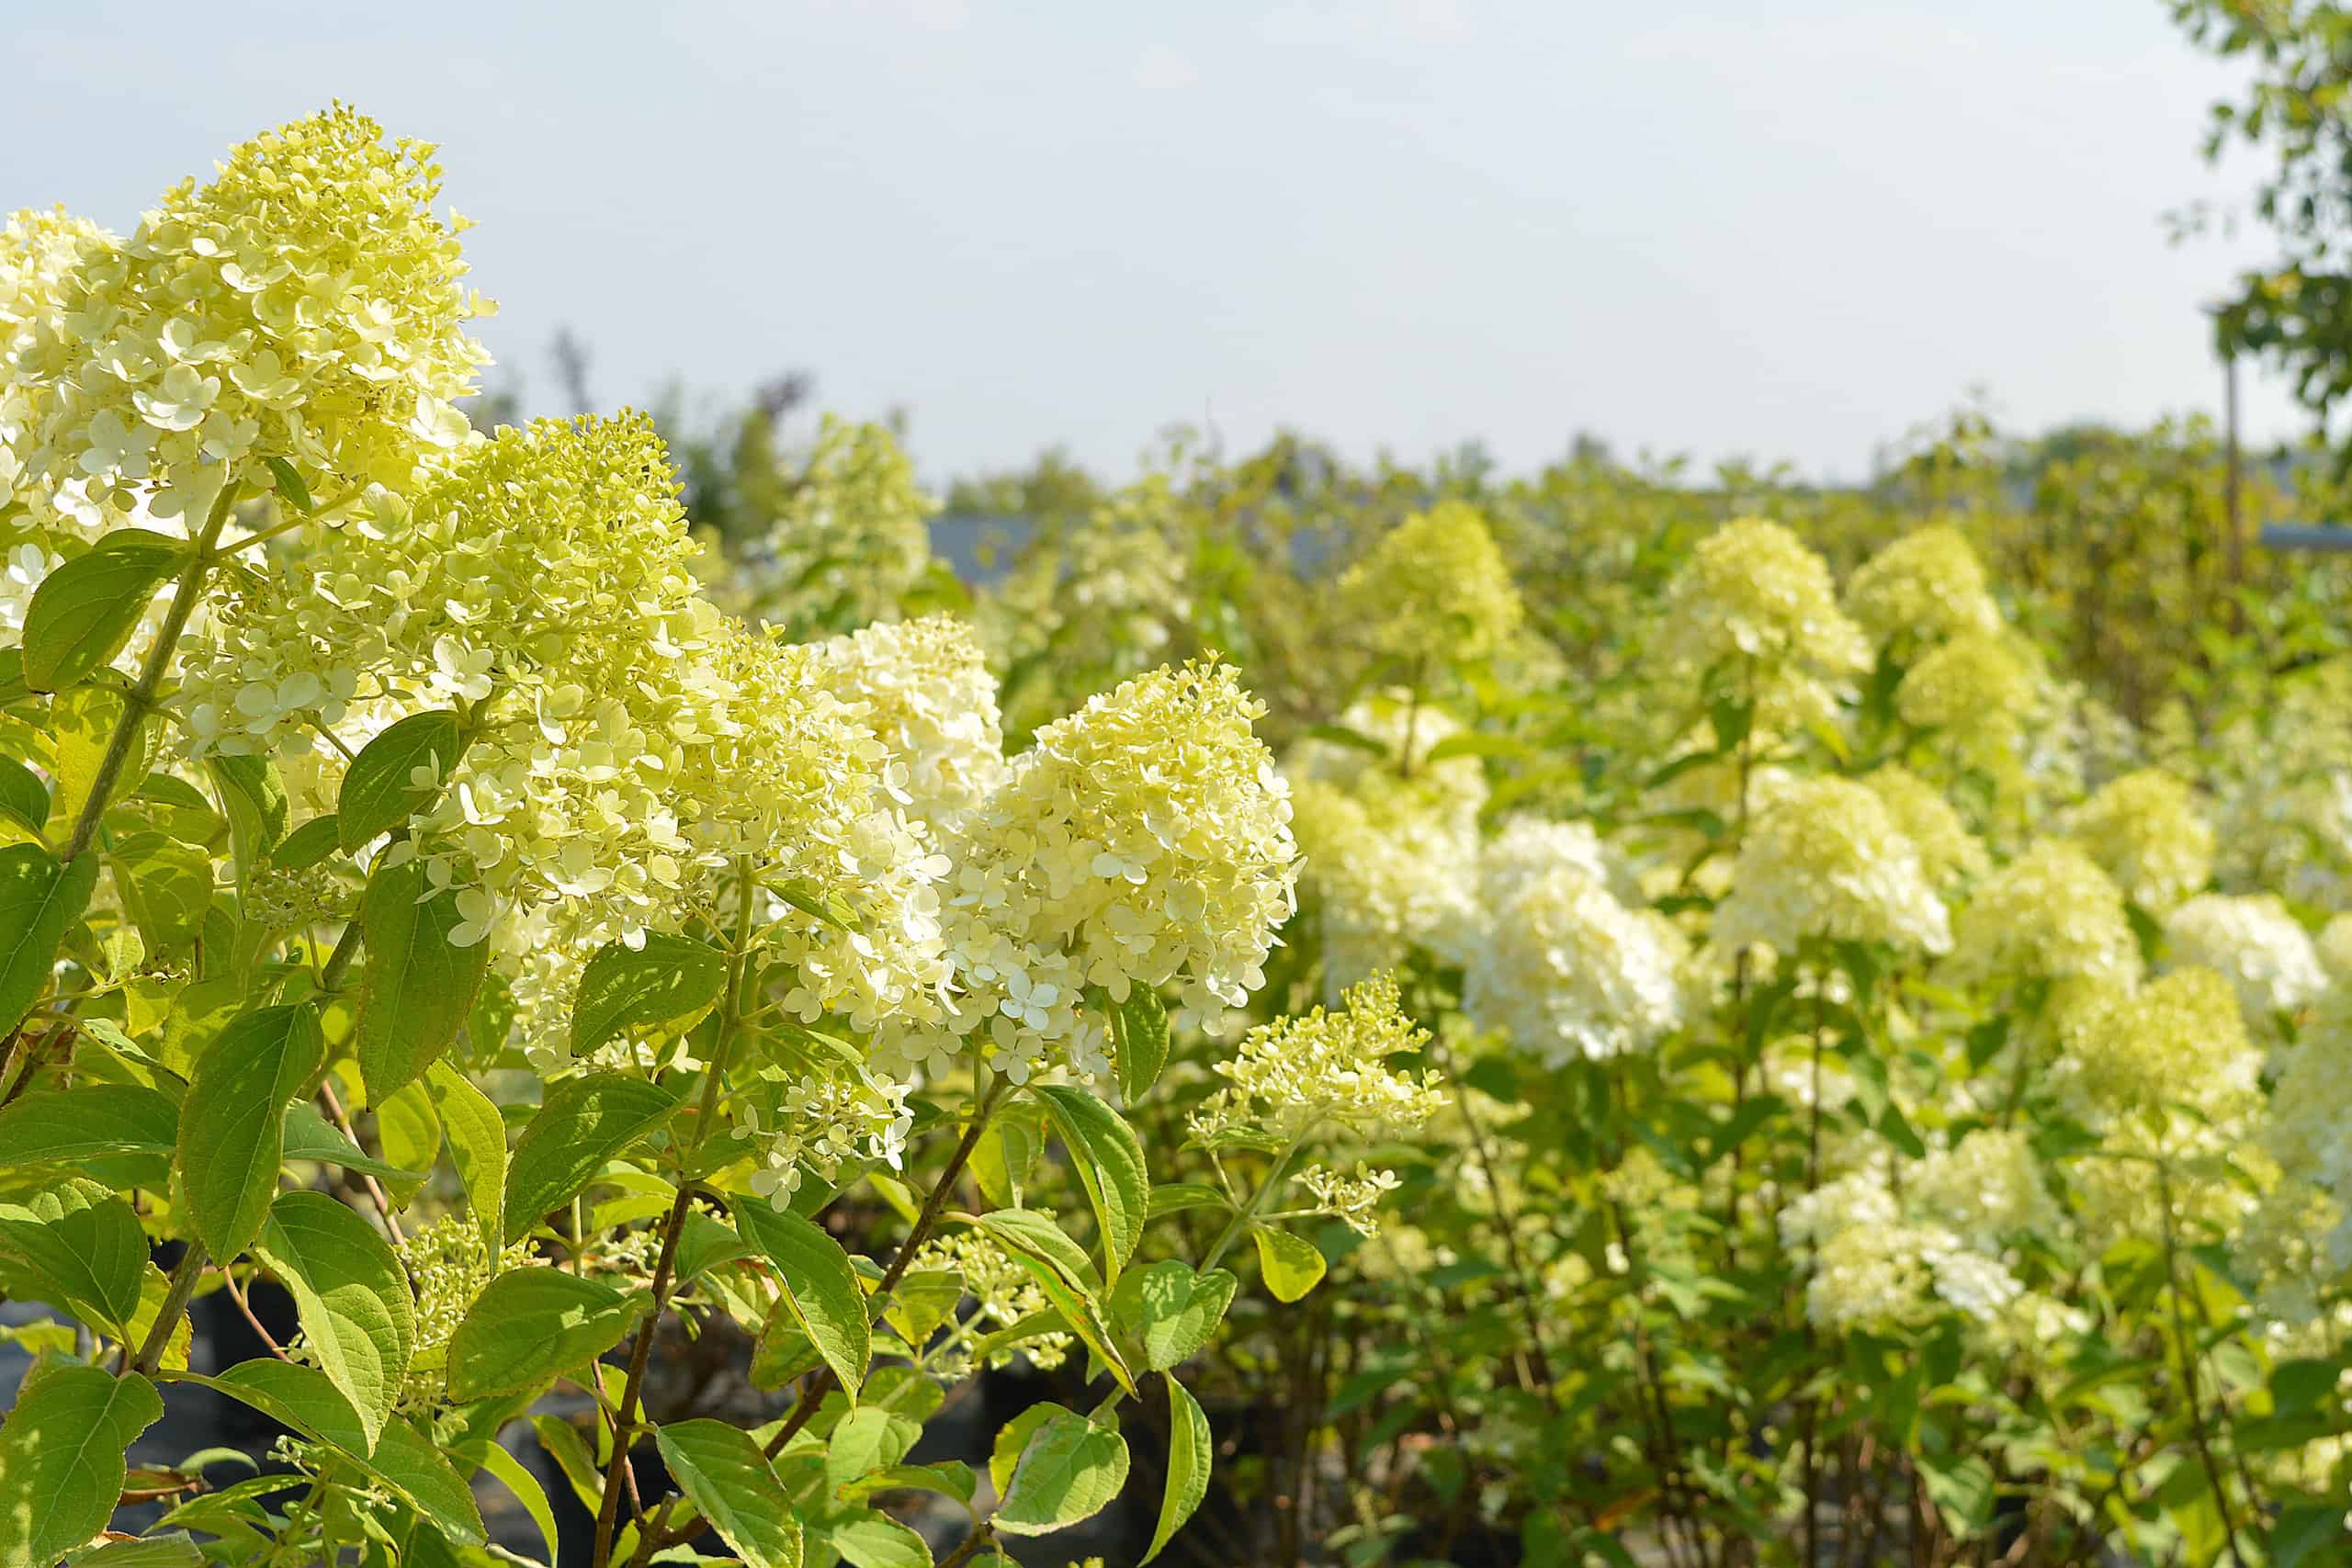 limelight hydrangea plant or shrub growing in the field. The ideal time to plant is fall.